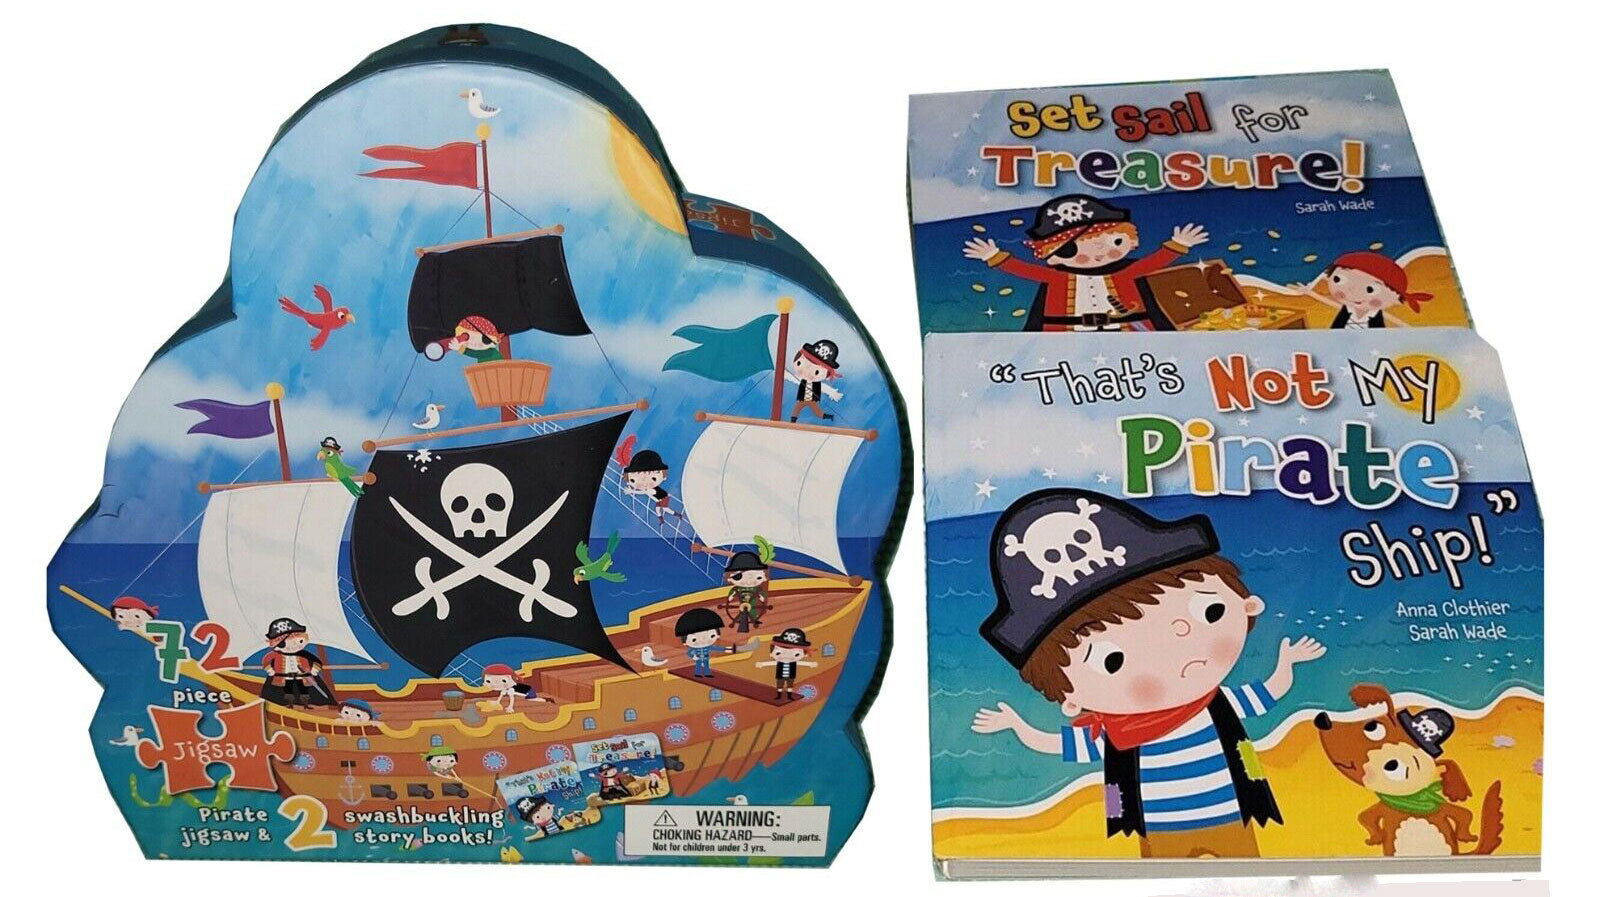 Jigsaw Puzzle And Swashbuckling Story Book